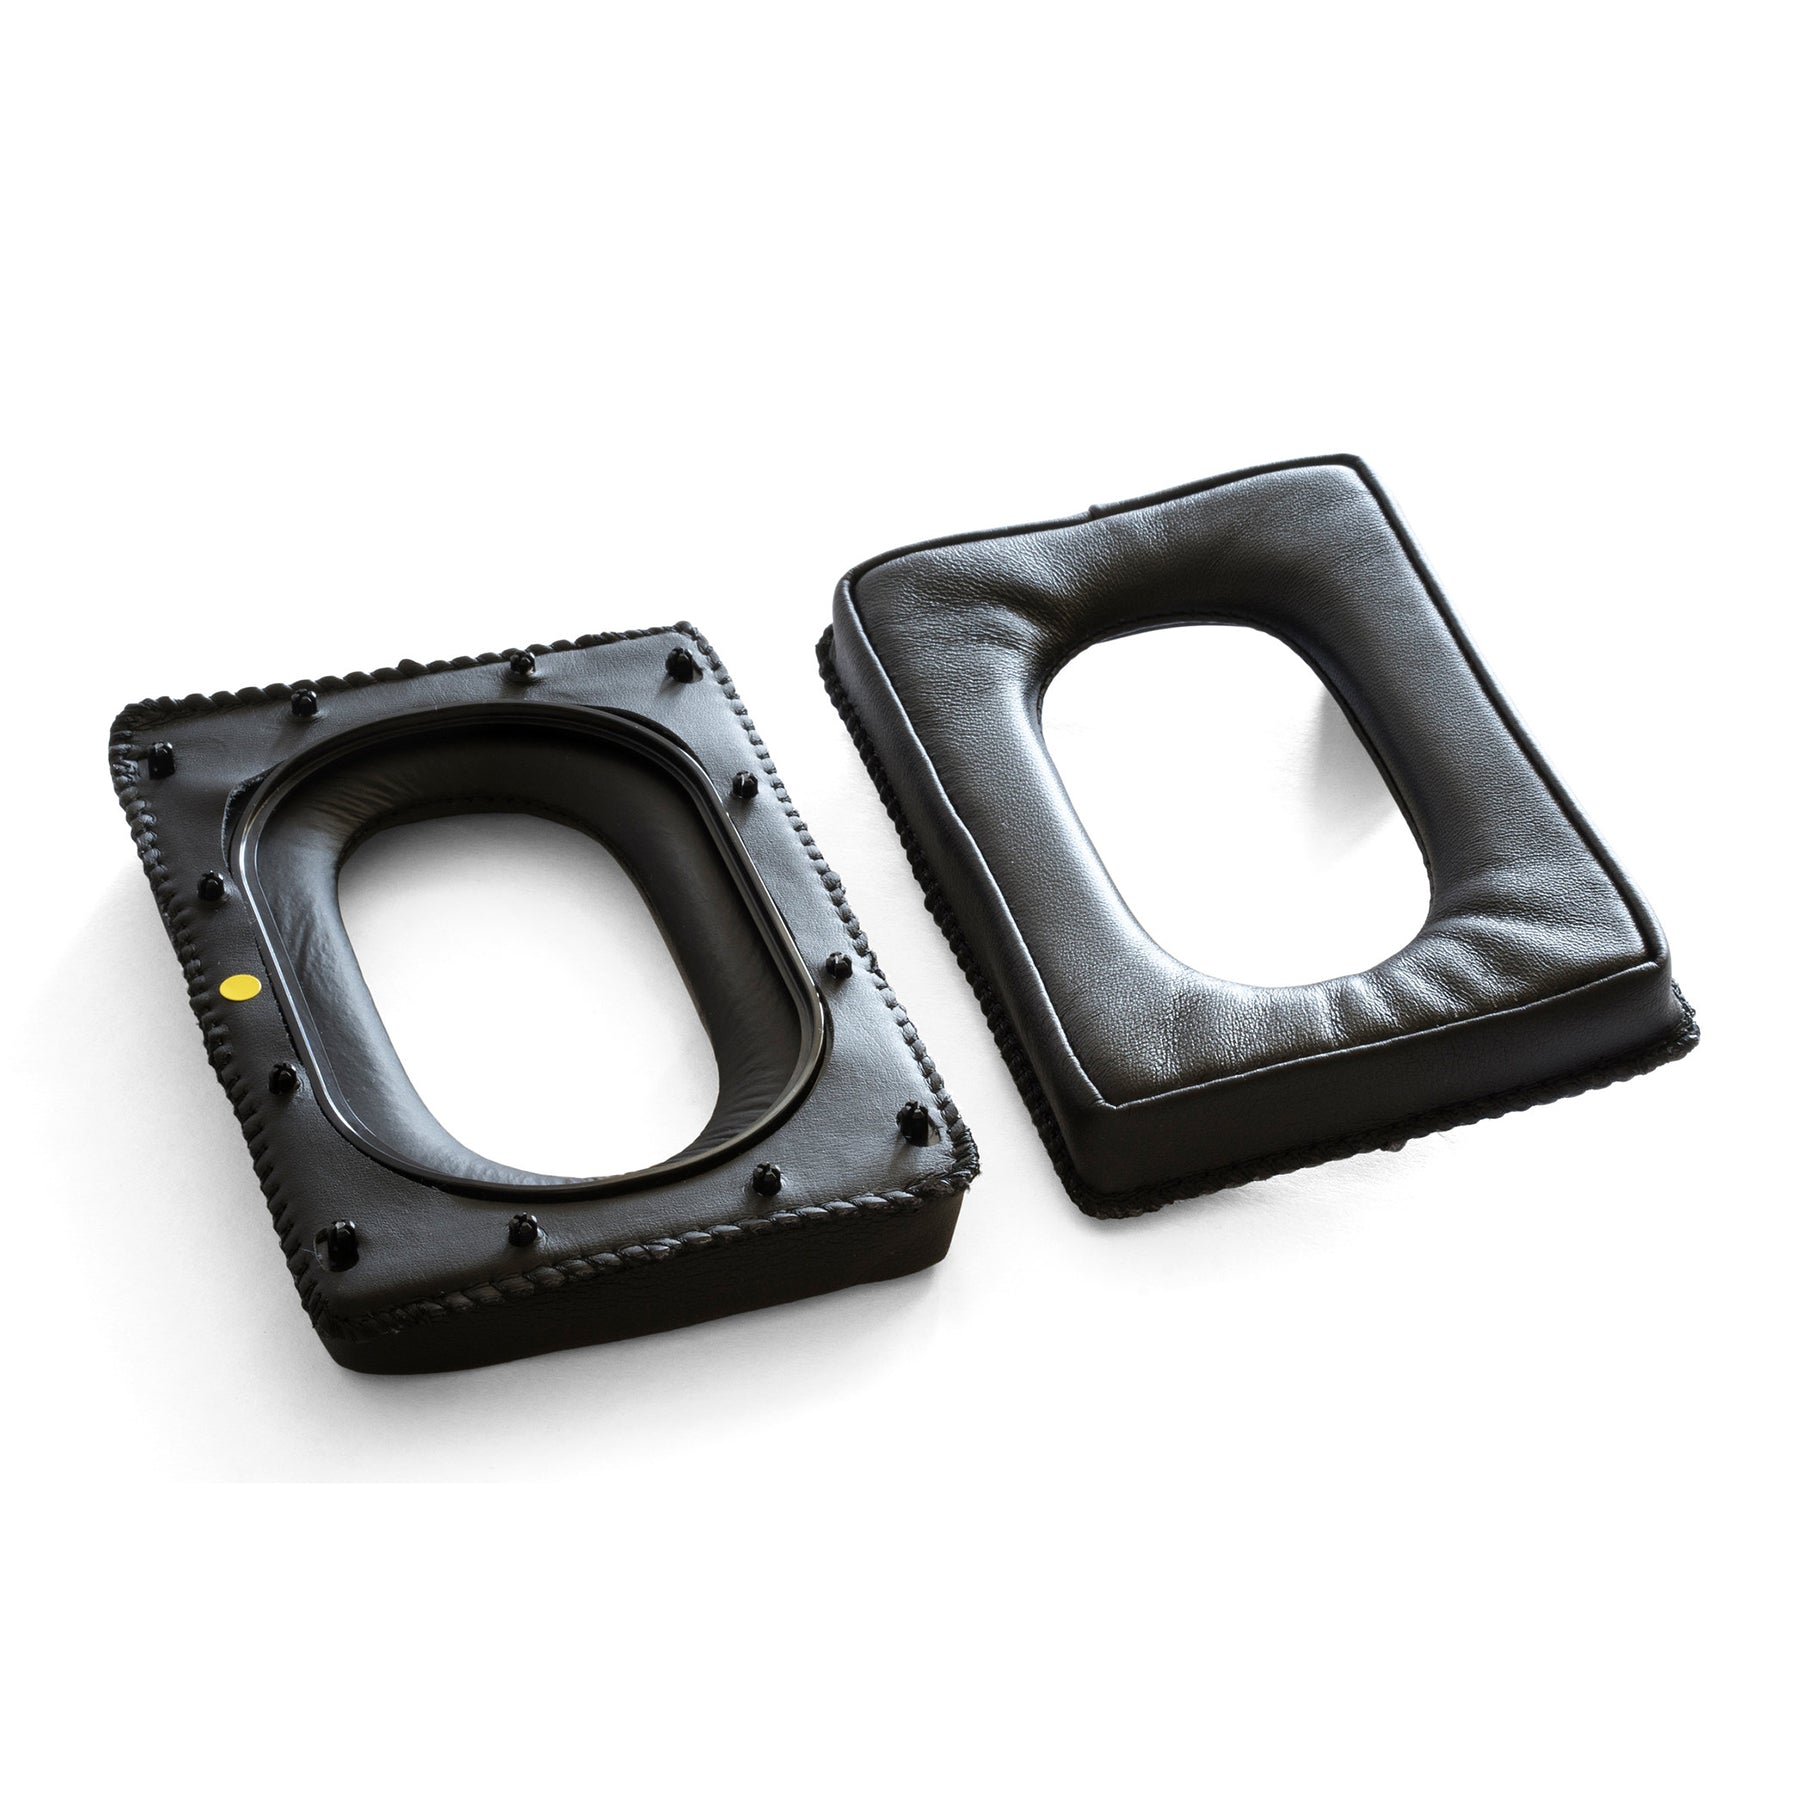 STAX EP-SRL700 Mk2 Replacement Earpads